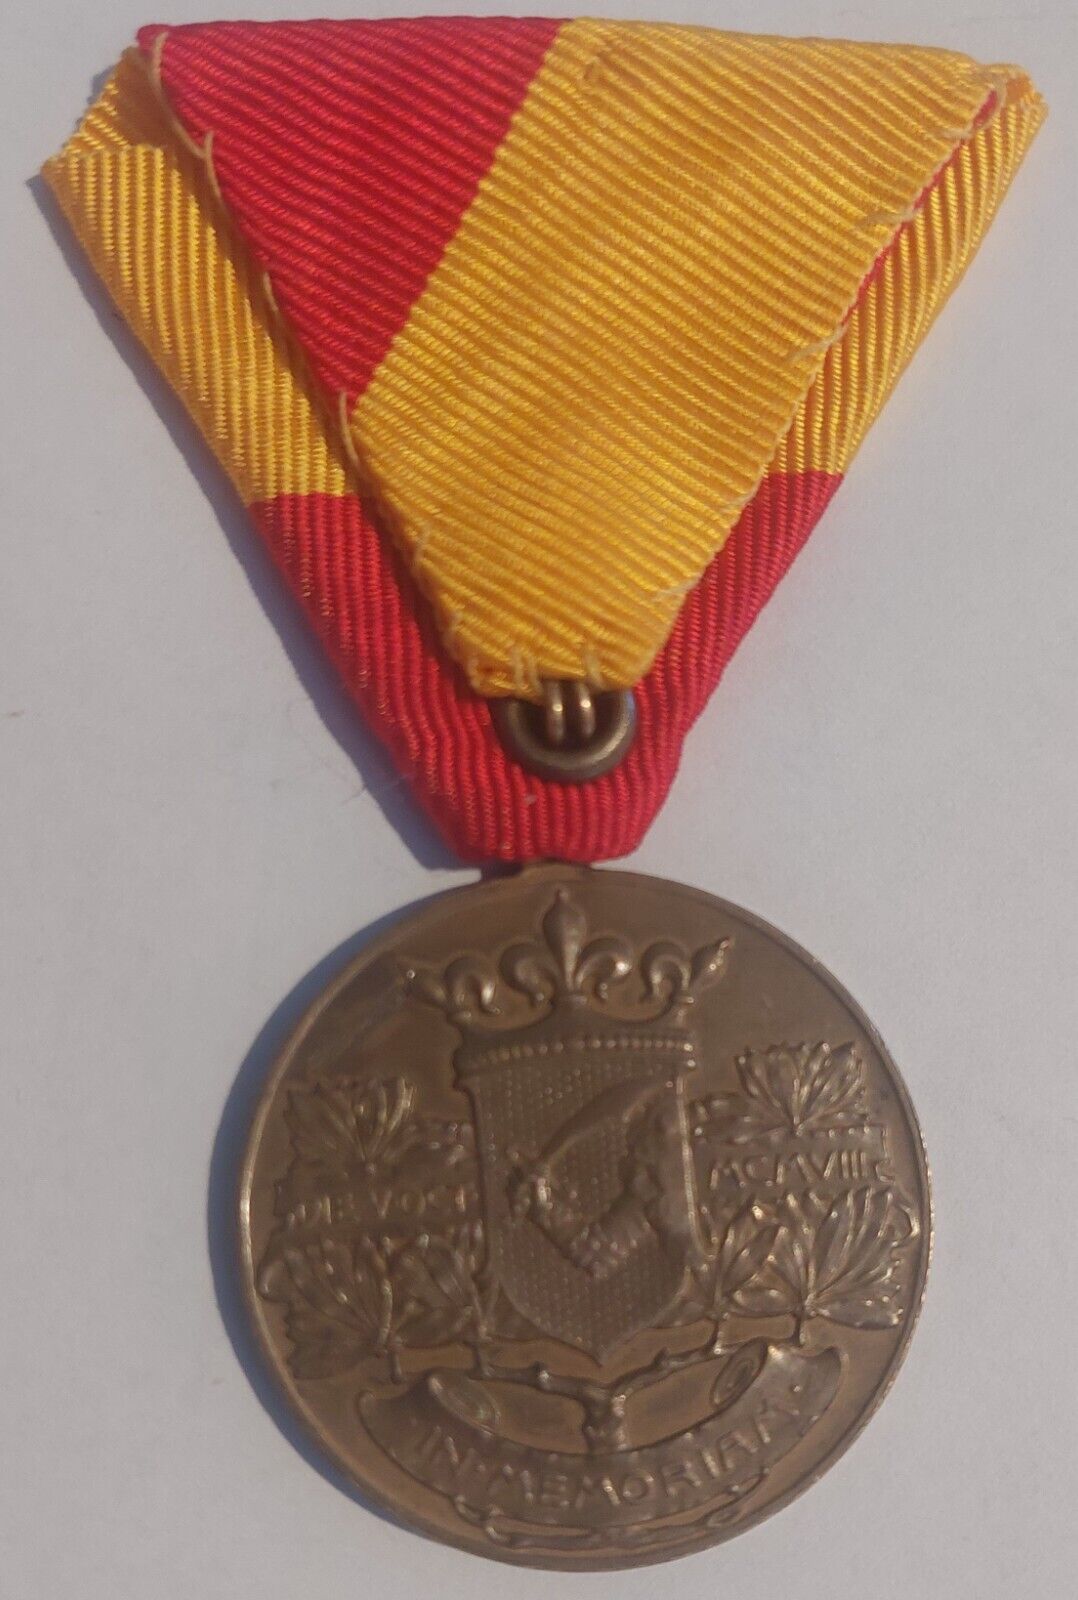 AustroHungary Military Medal-1909-Medal Bosnia-Original medal from that time